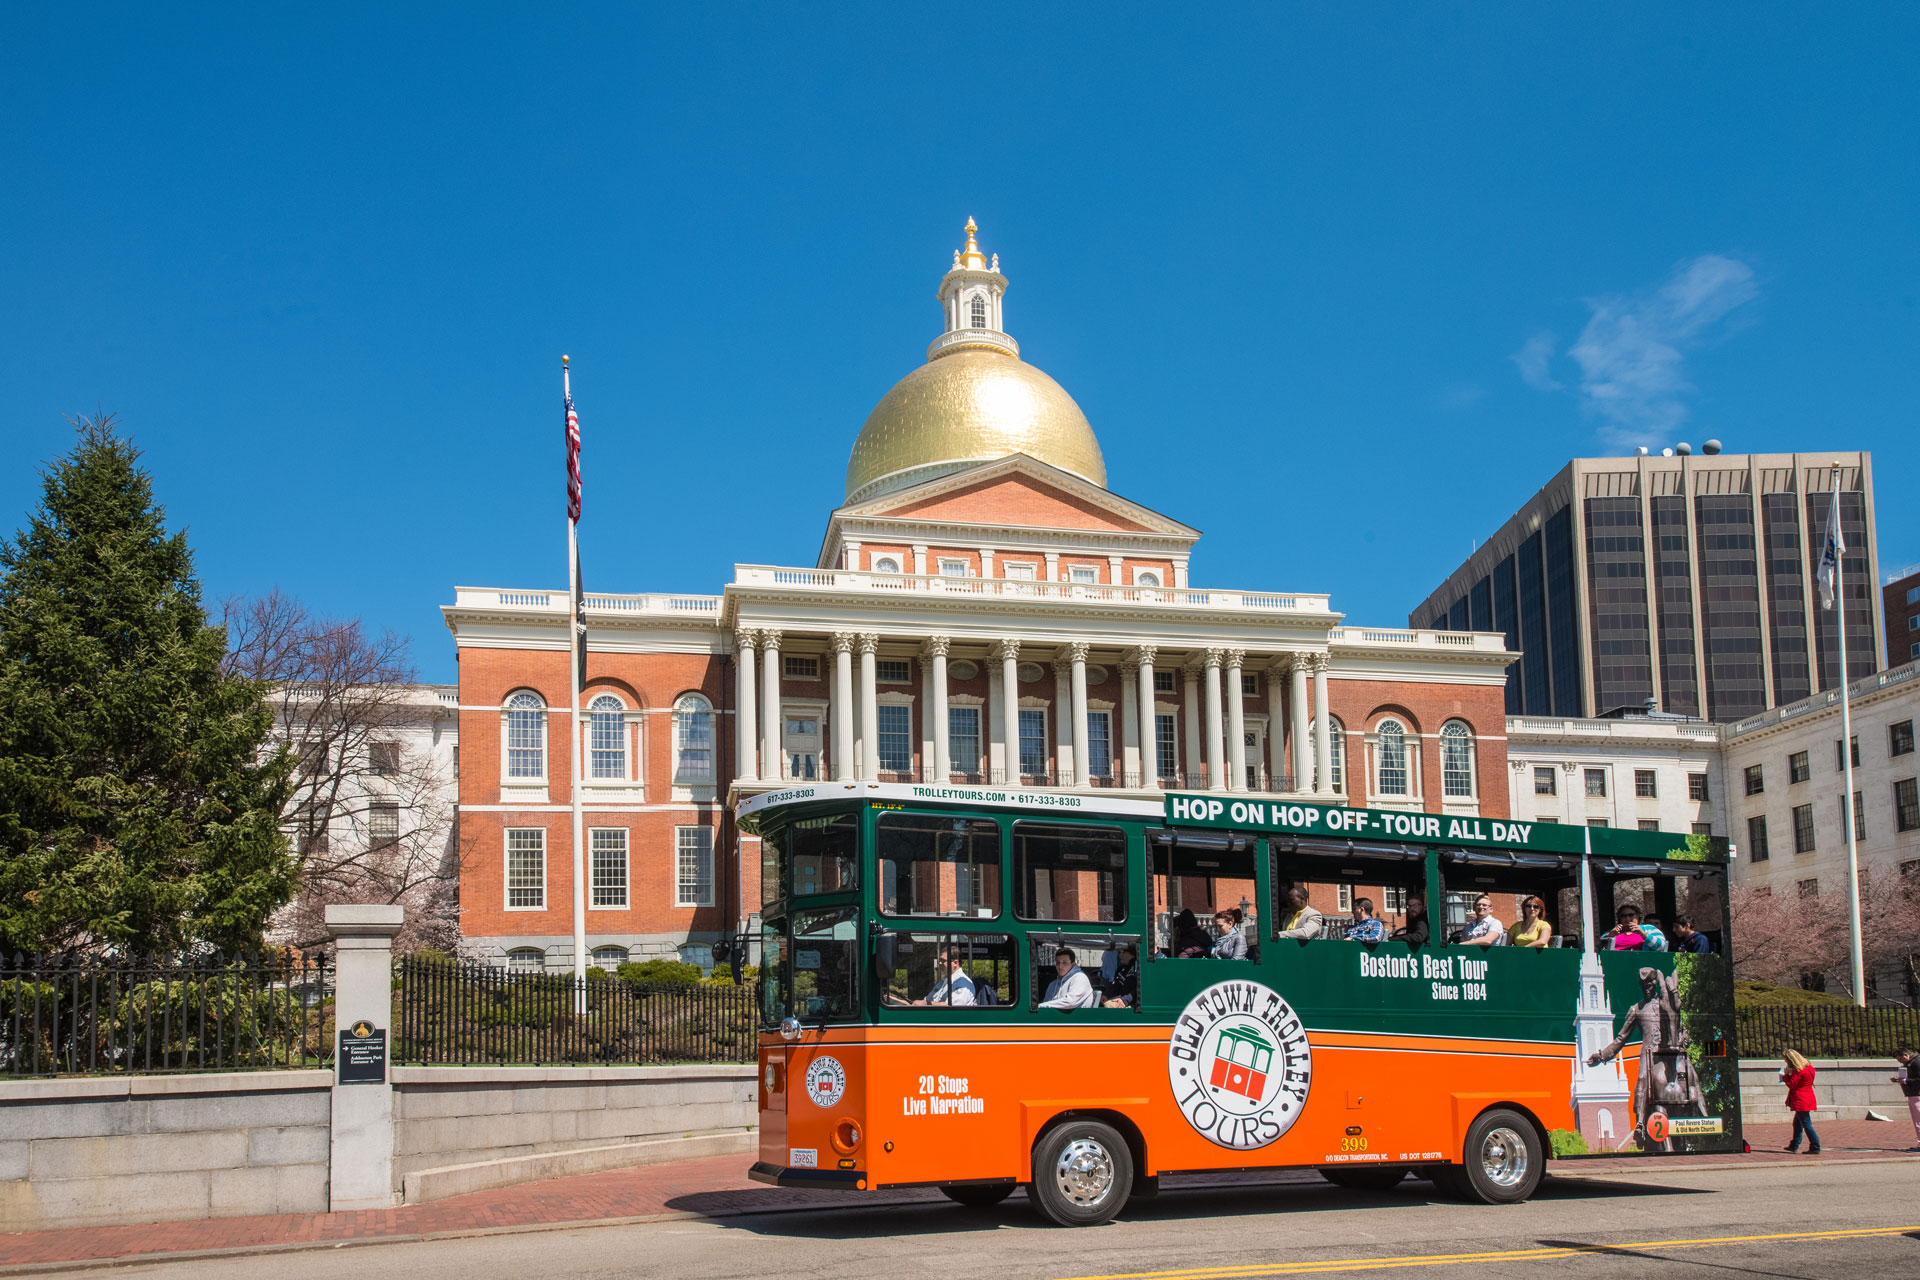 Discover the history of Boston